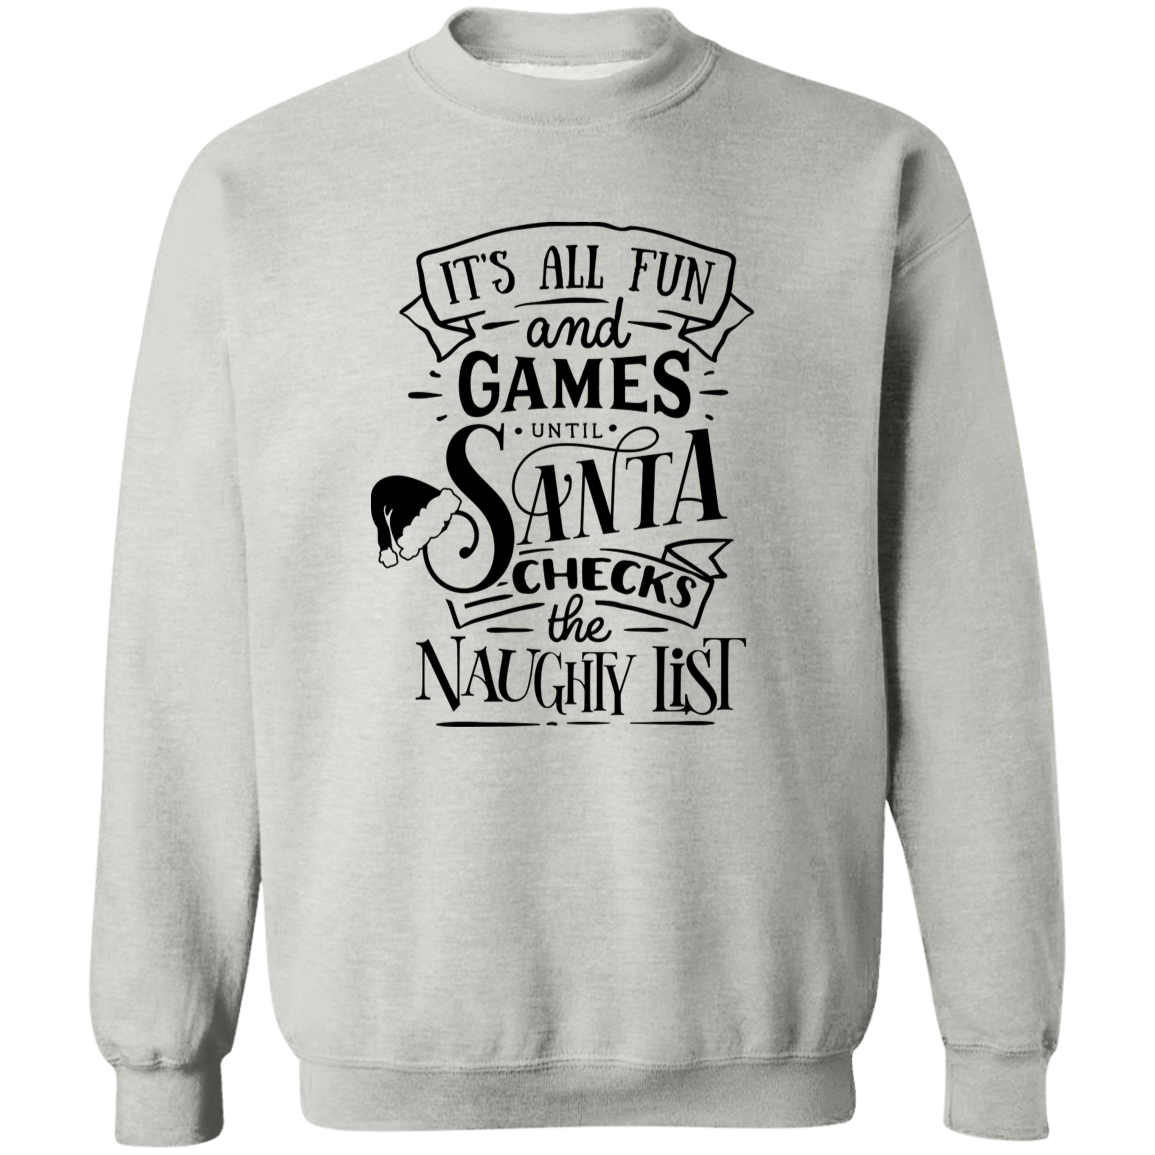 Its All Fun And Games G180 Crewneck Pullover Sweatshirt